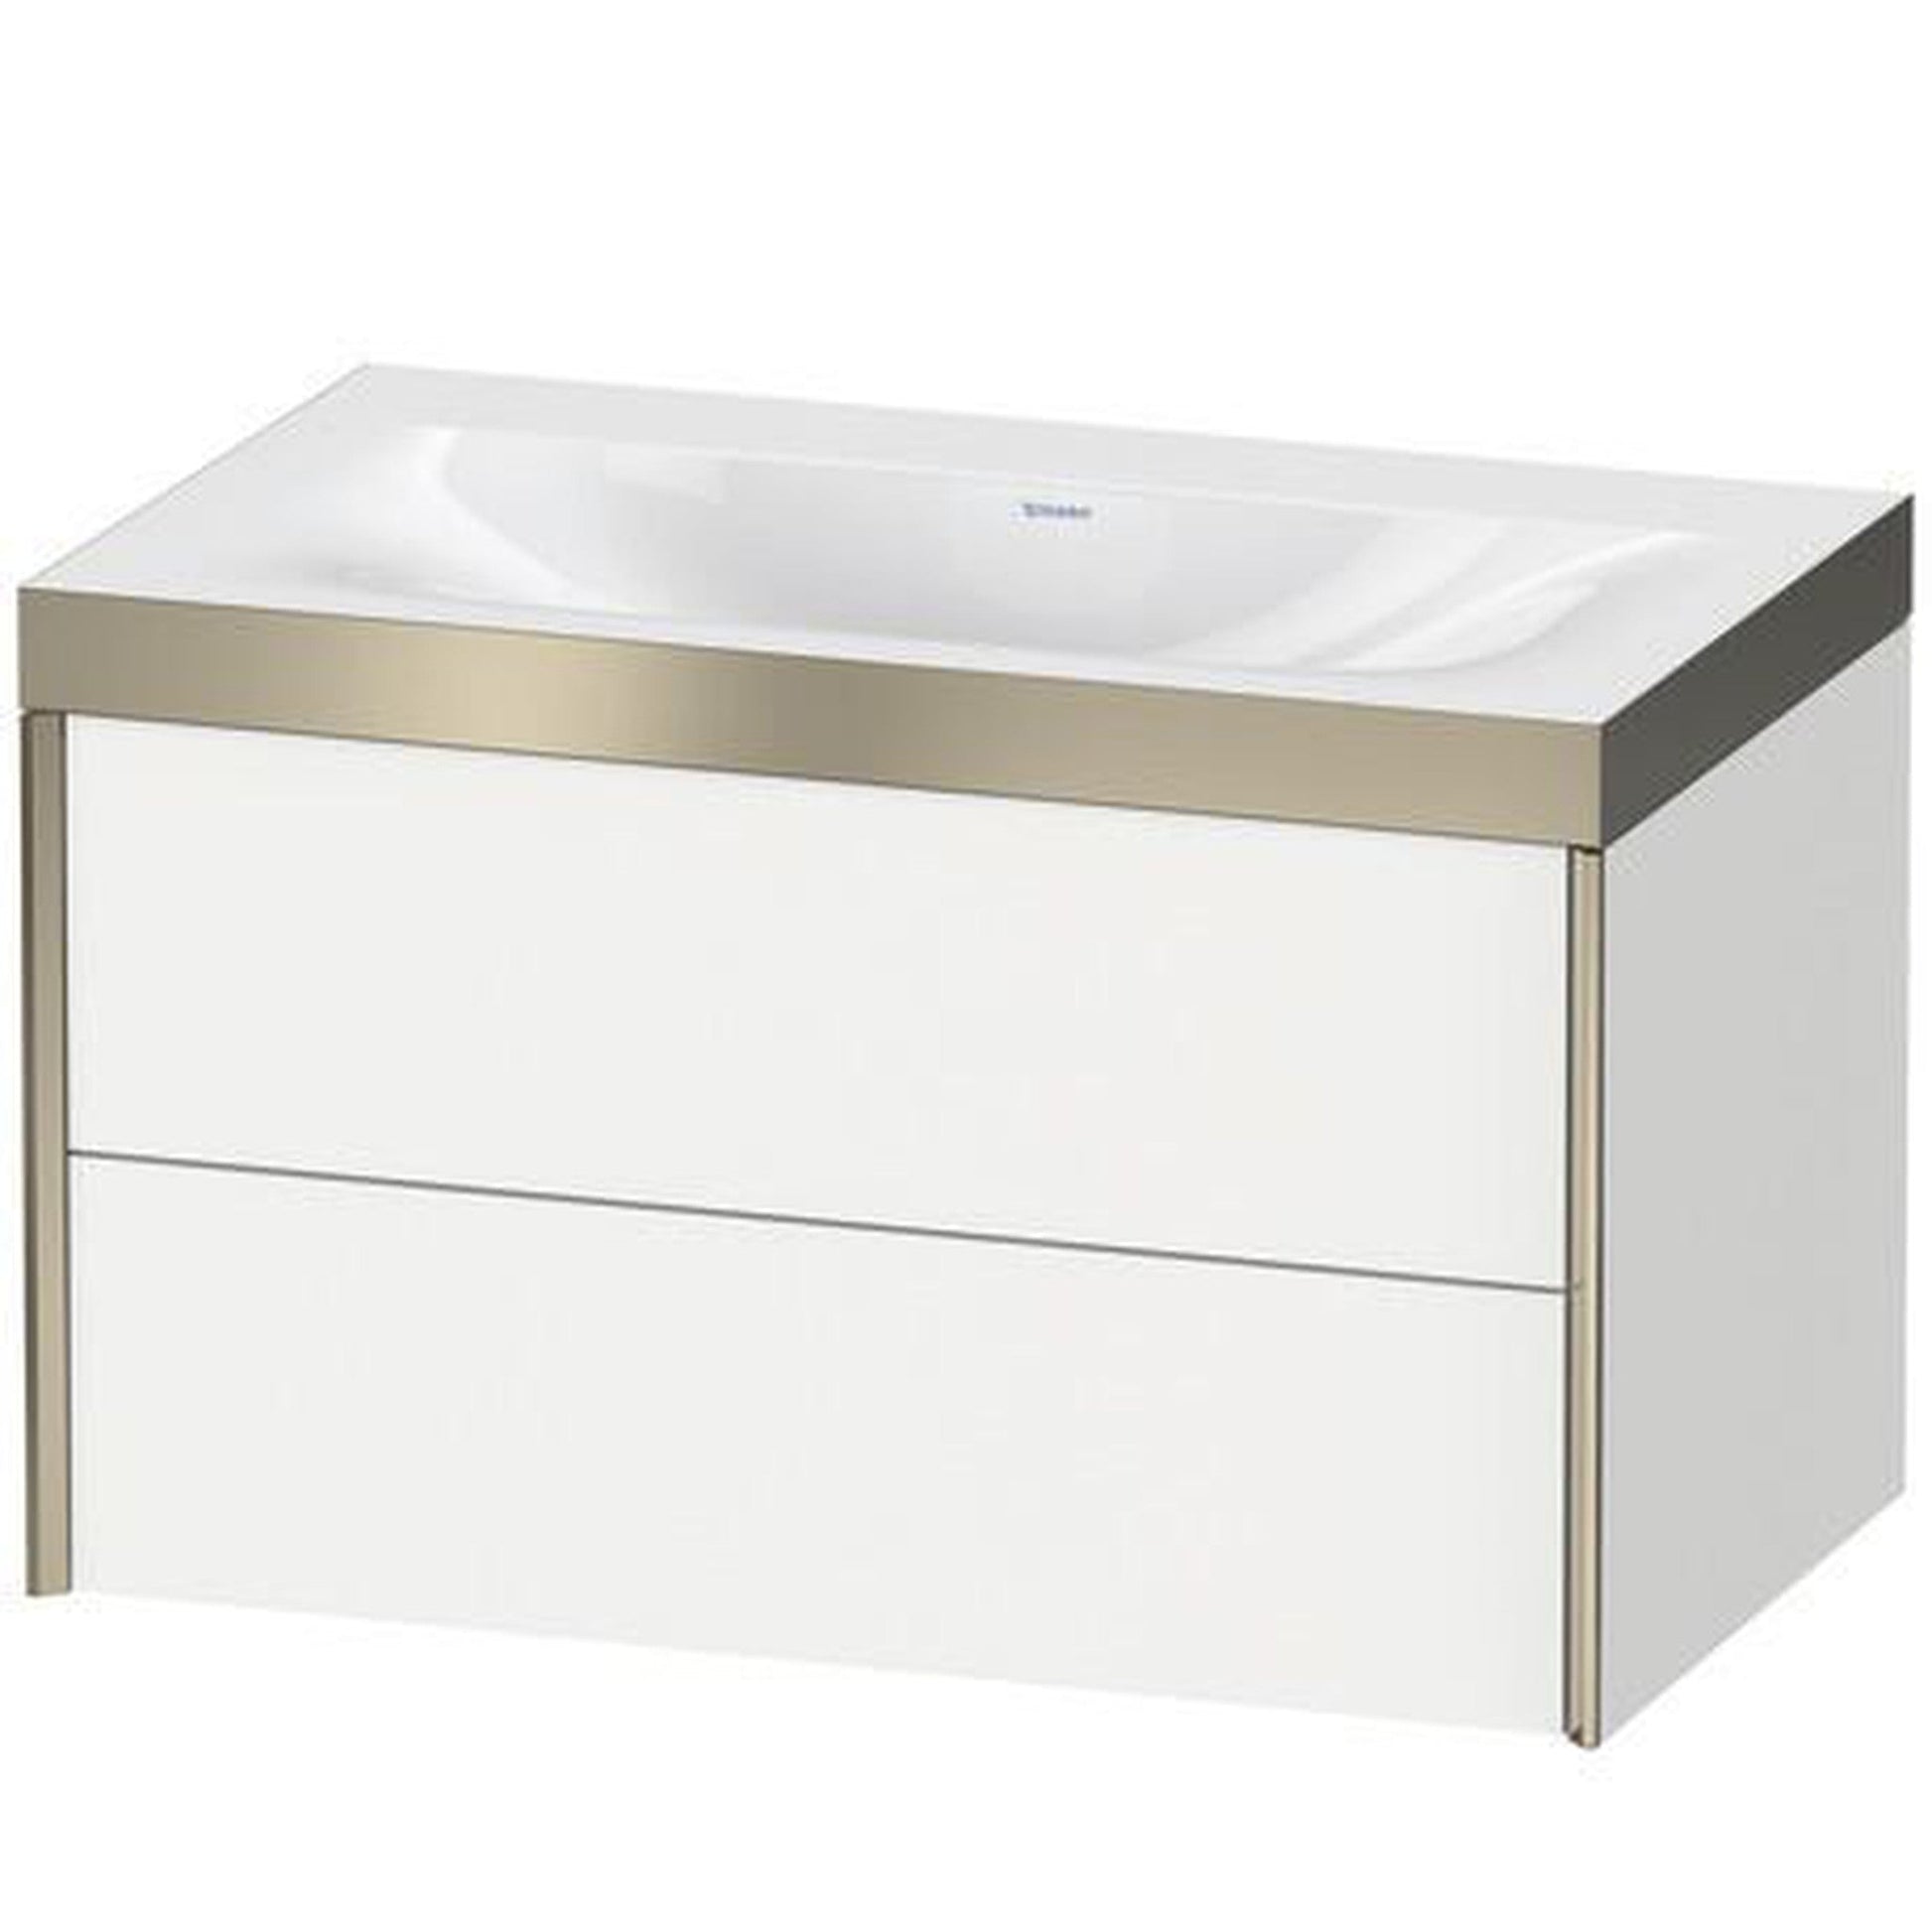 Duravit Xviu 31" x 20" x 19" Two Drawer C-Bonded Wall-Mount Vanity Kit Without Tap Hole, White (XV4615NB118P)